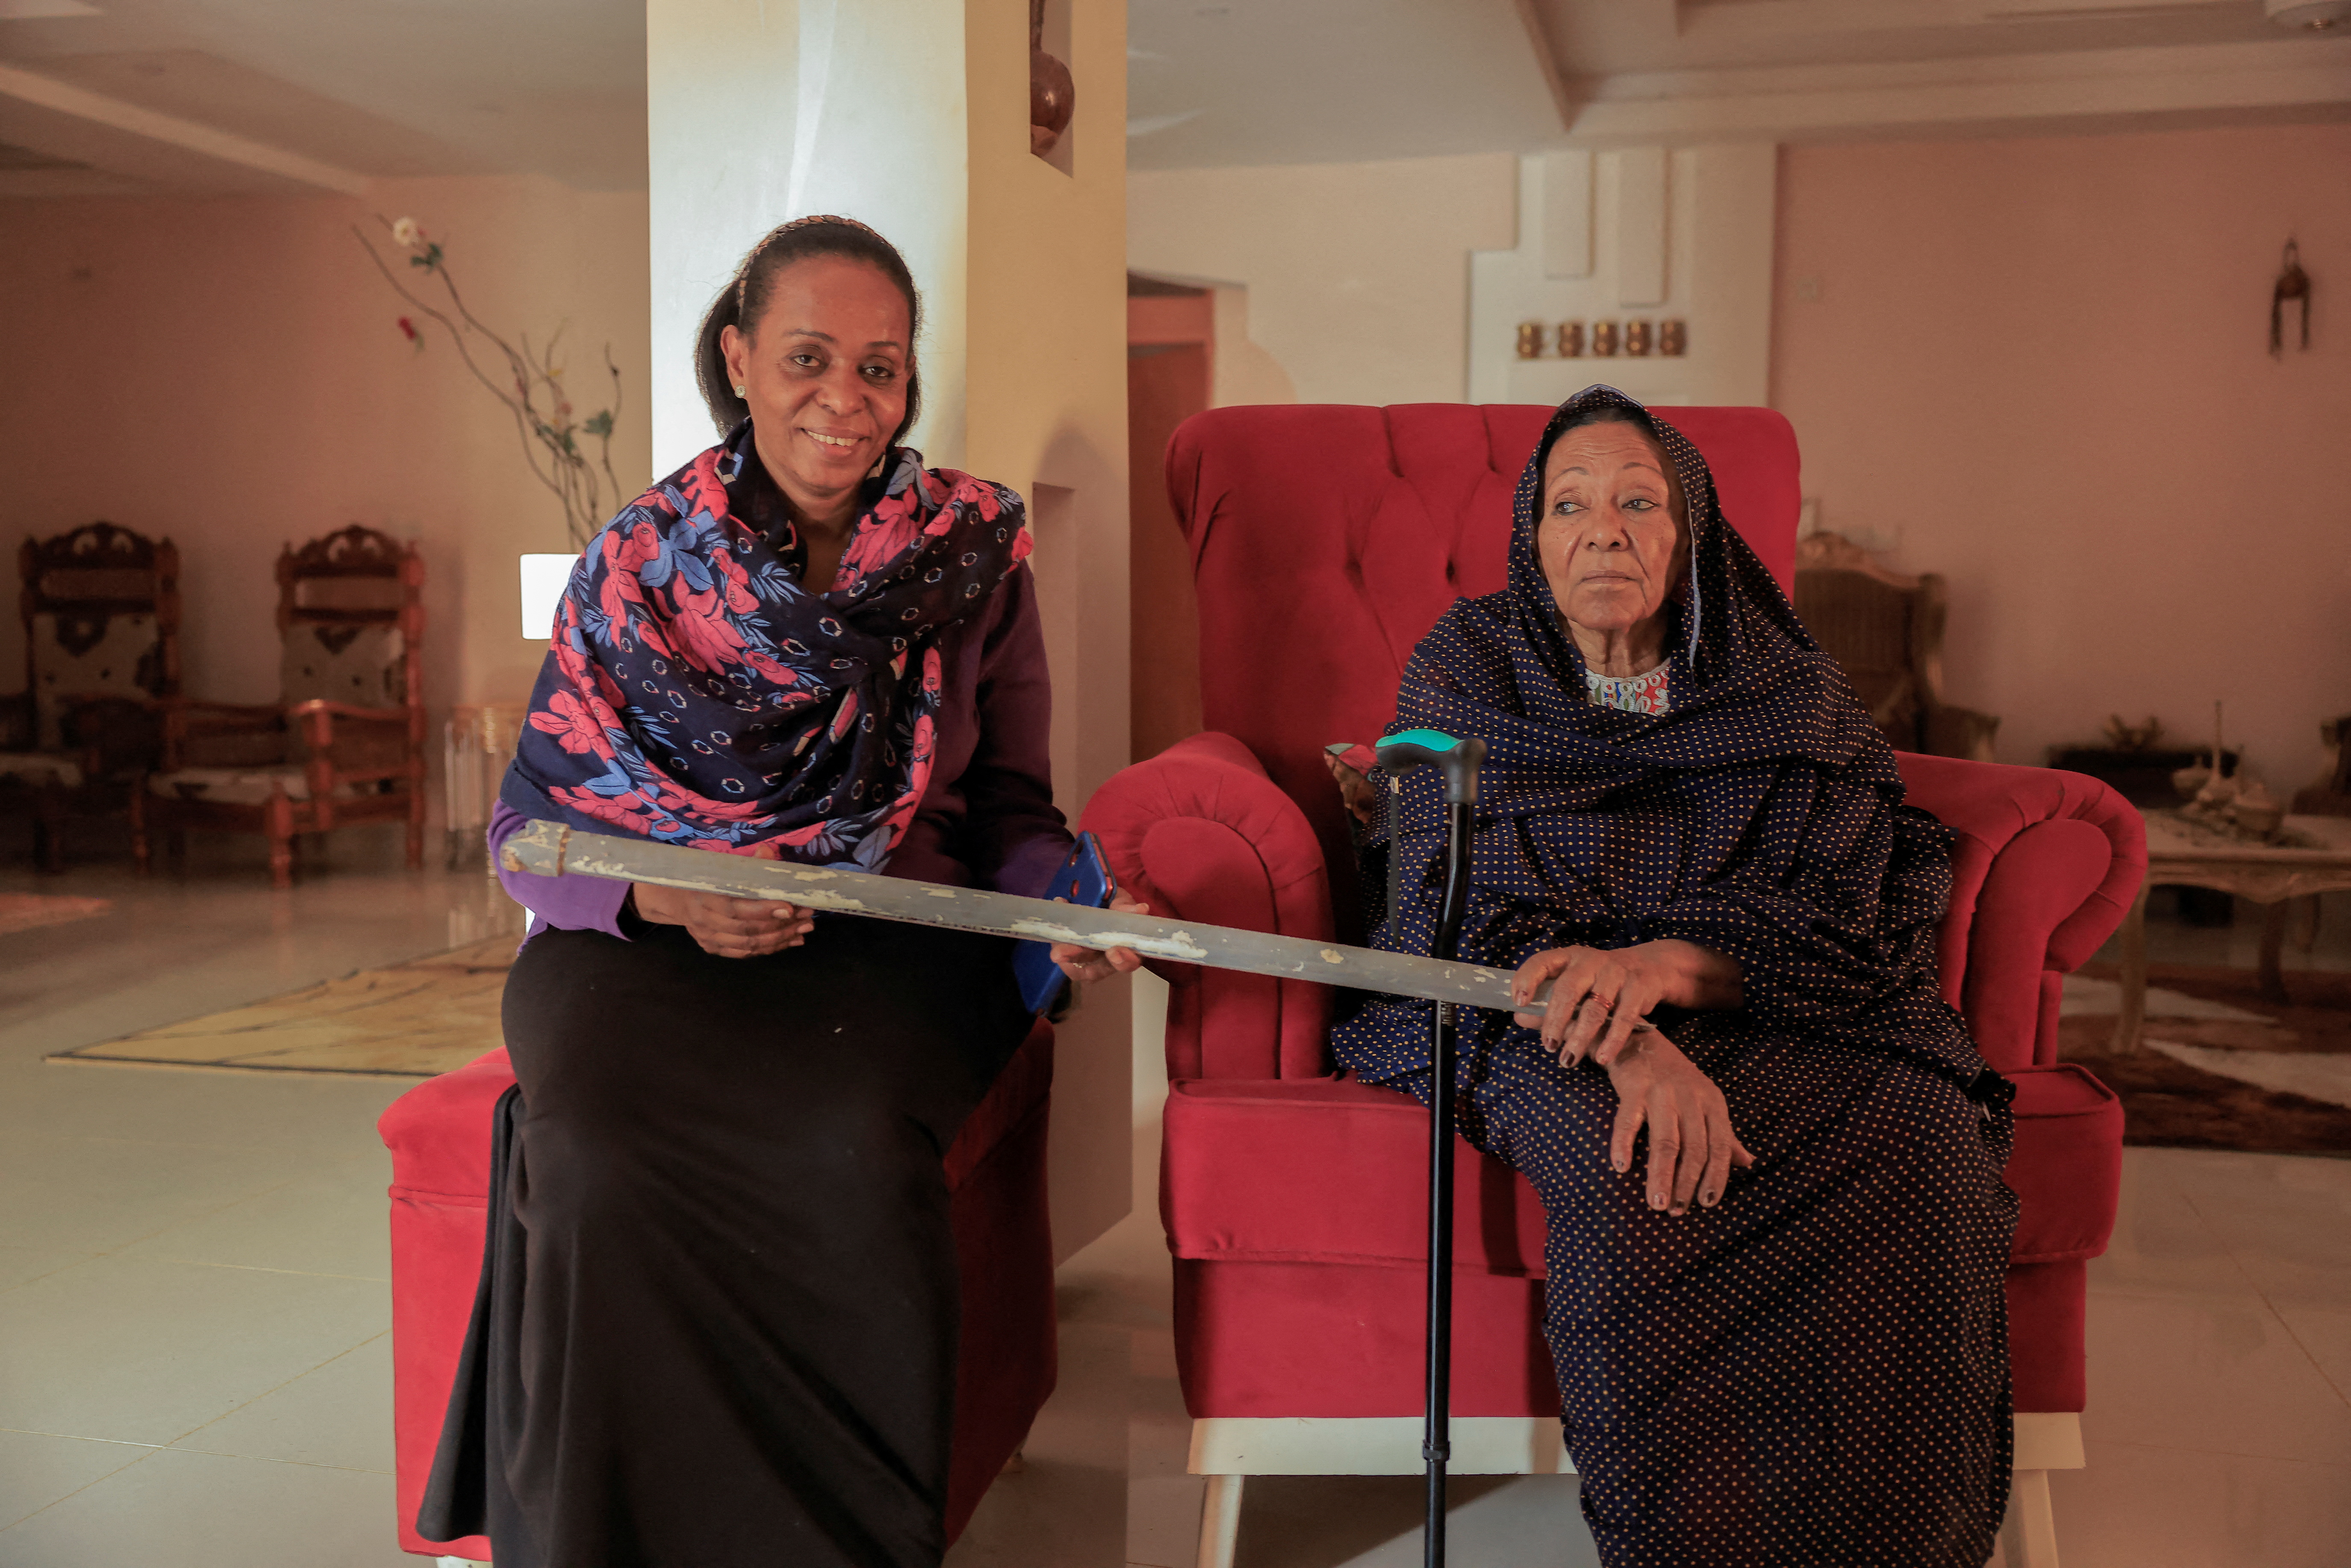 Mother and sister of prominent Sudanese women's rights campaigner Amira Osman carry a stick left by security after arrest in her home in Khartoum